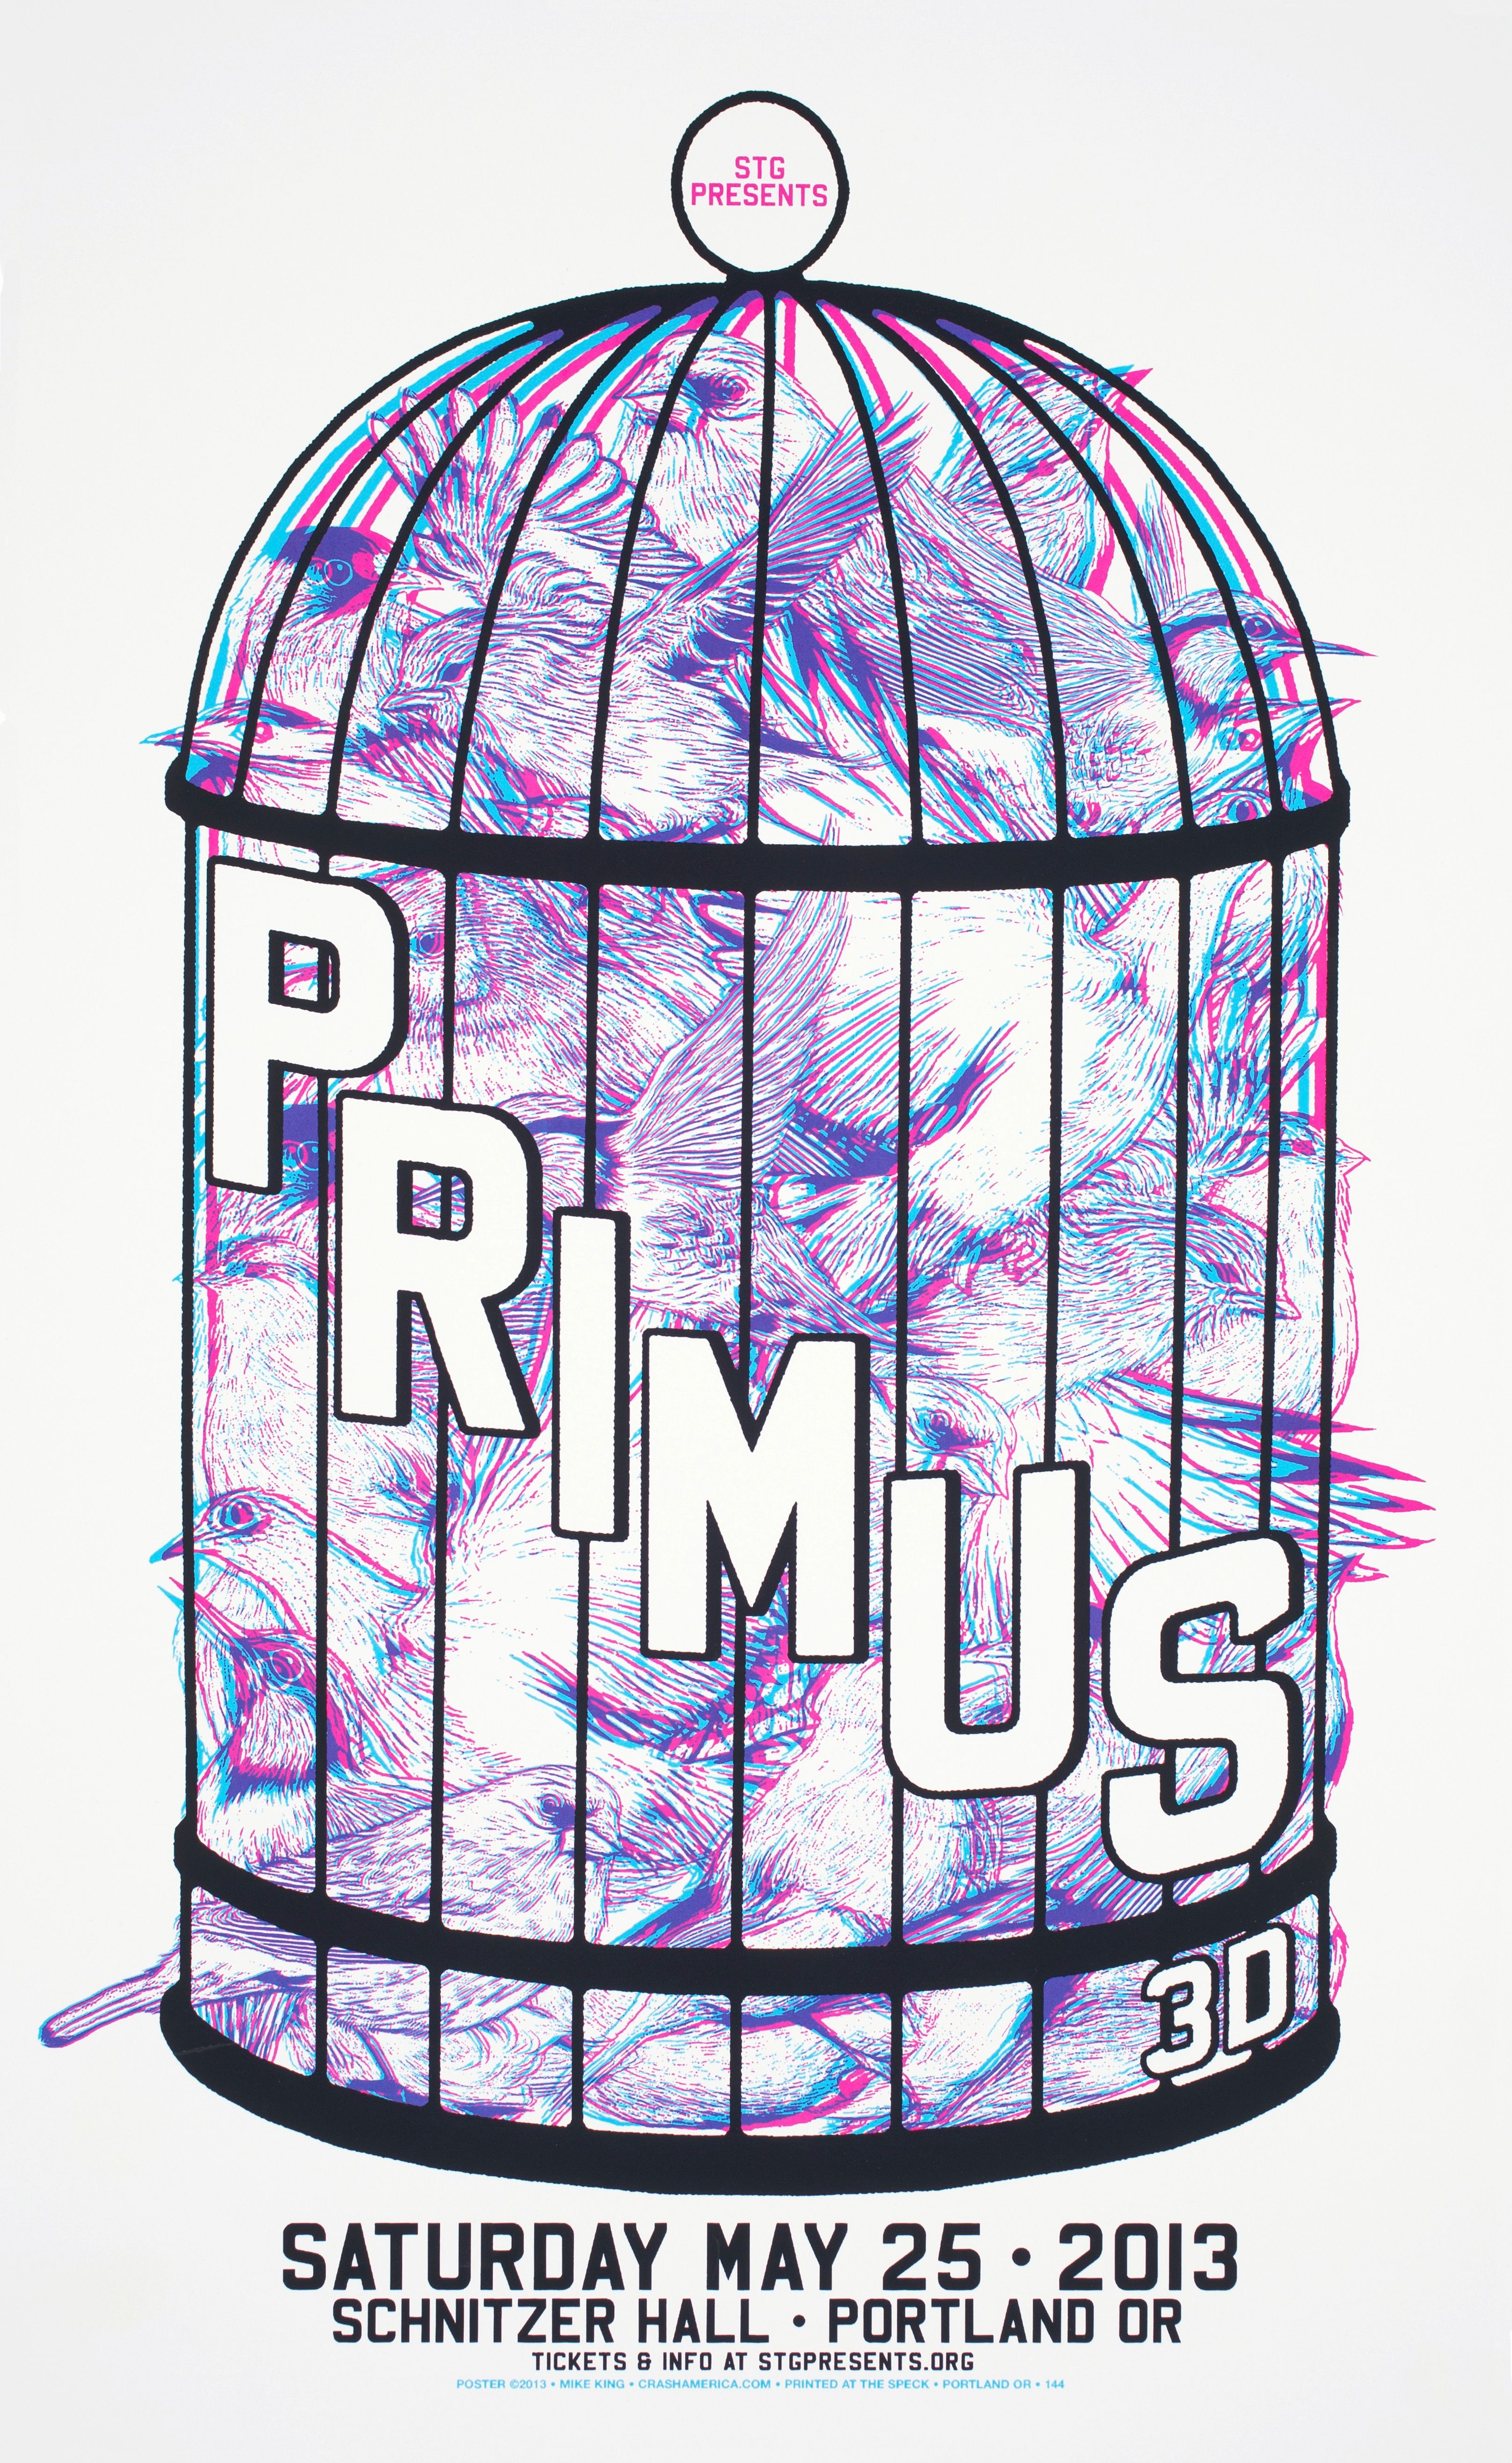 MXP-82.1 Primus 2013 Schnitzer Hall  May 25 Concert Poster